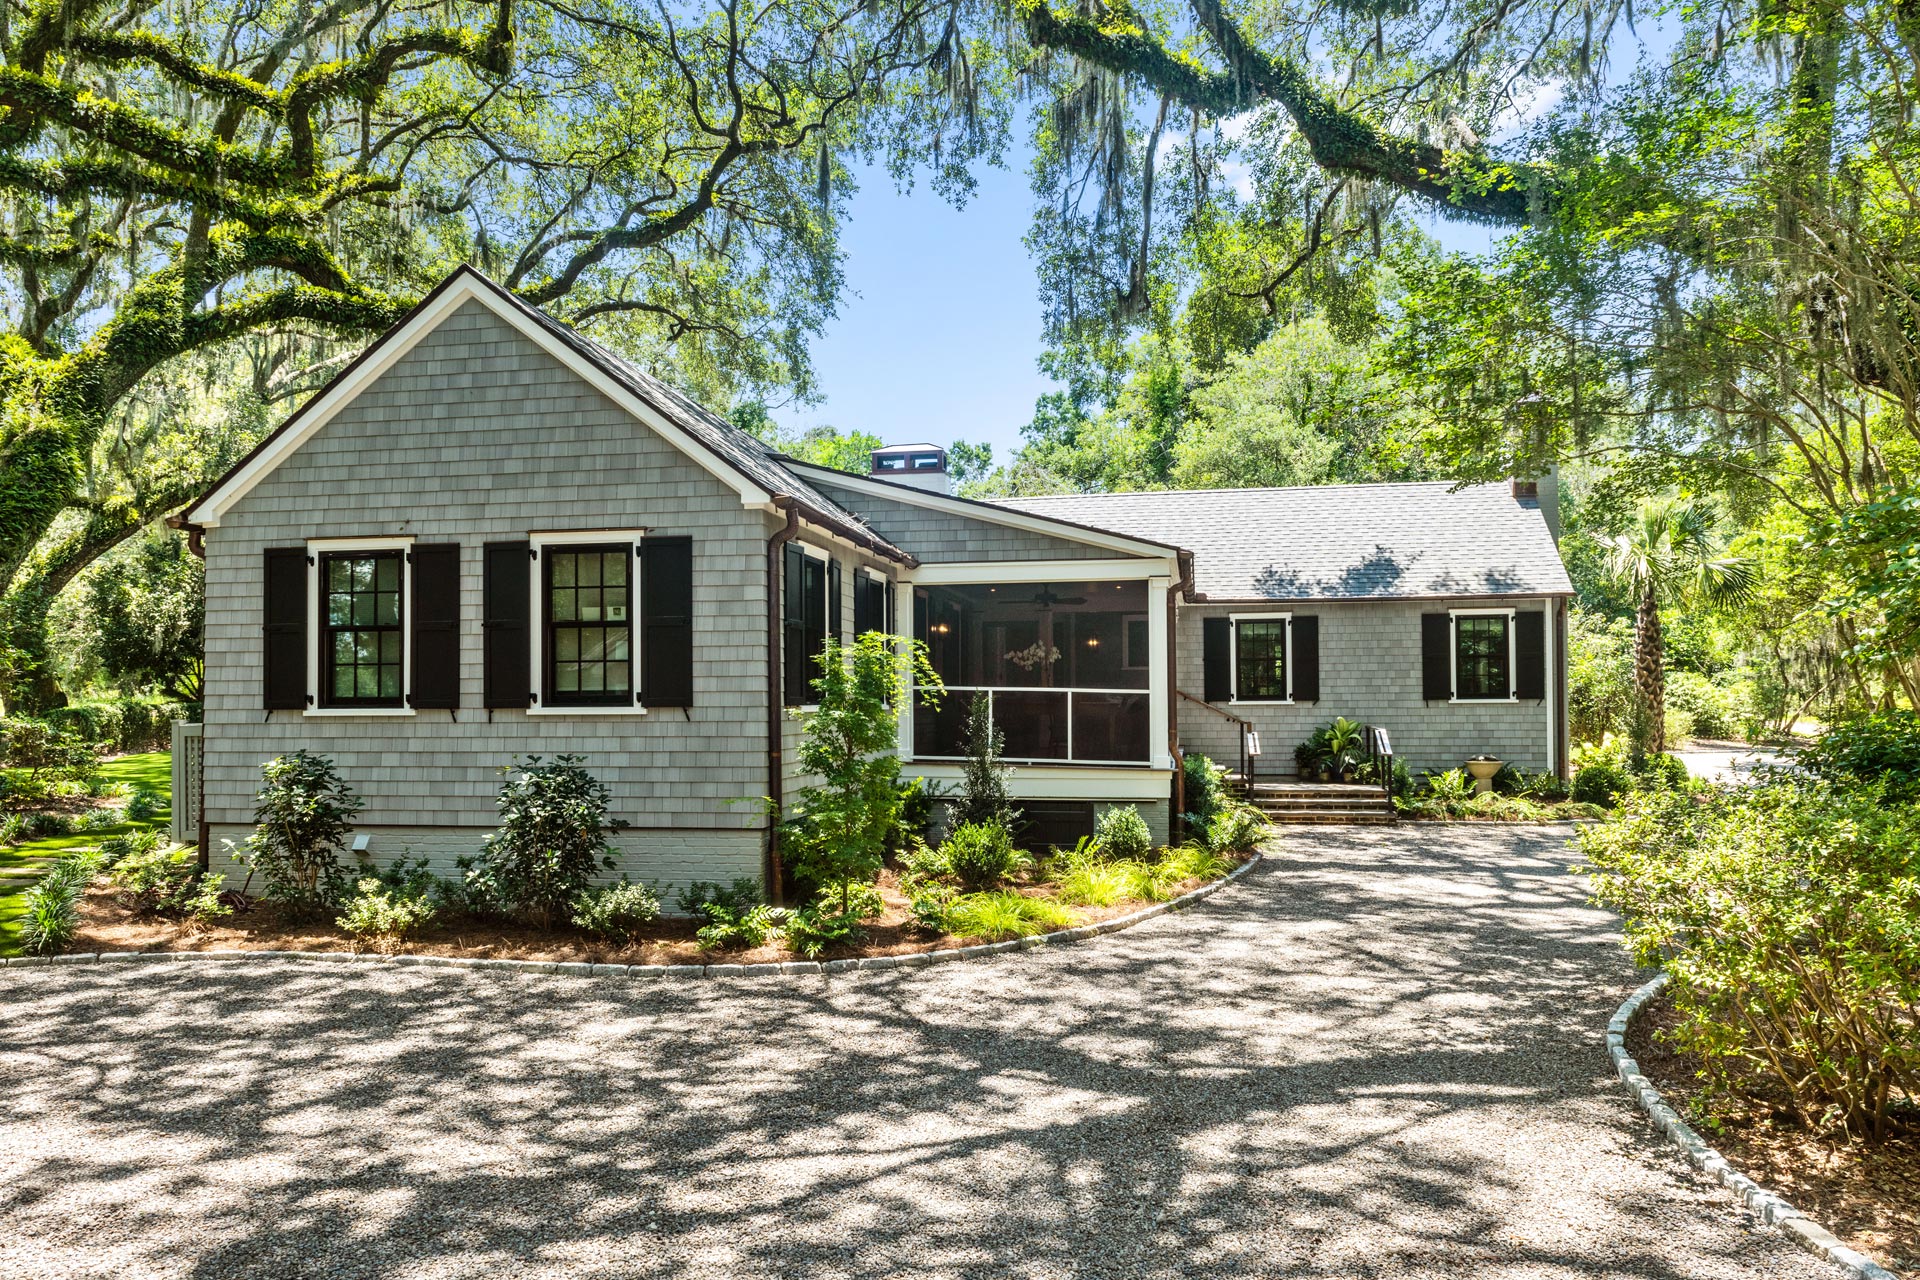 Quaint Hanahan, SC cottage renovation to expand into garage to create living space